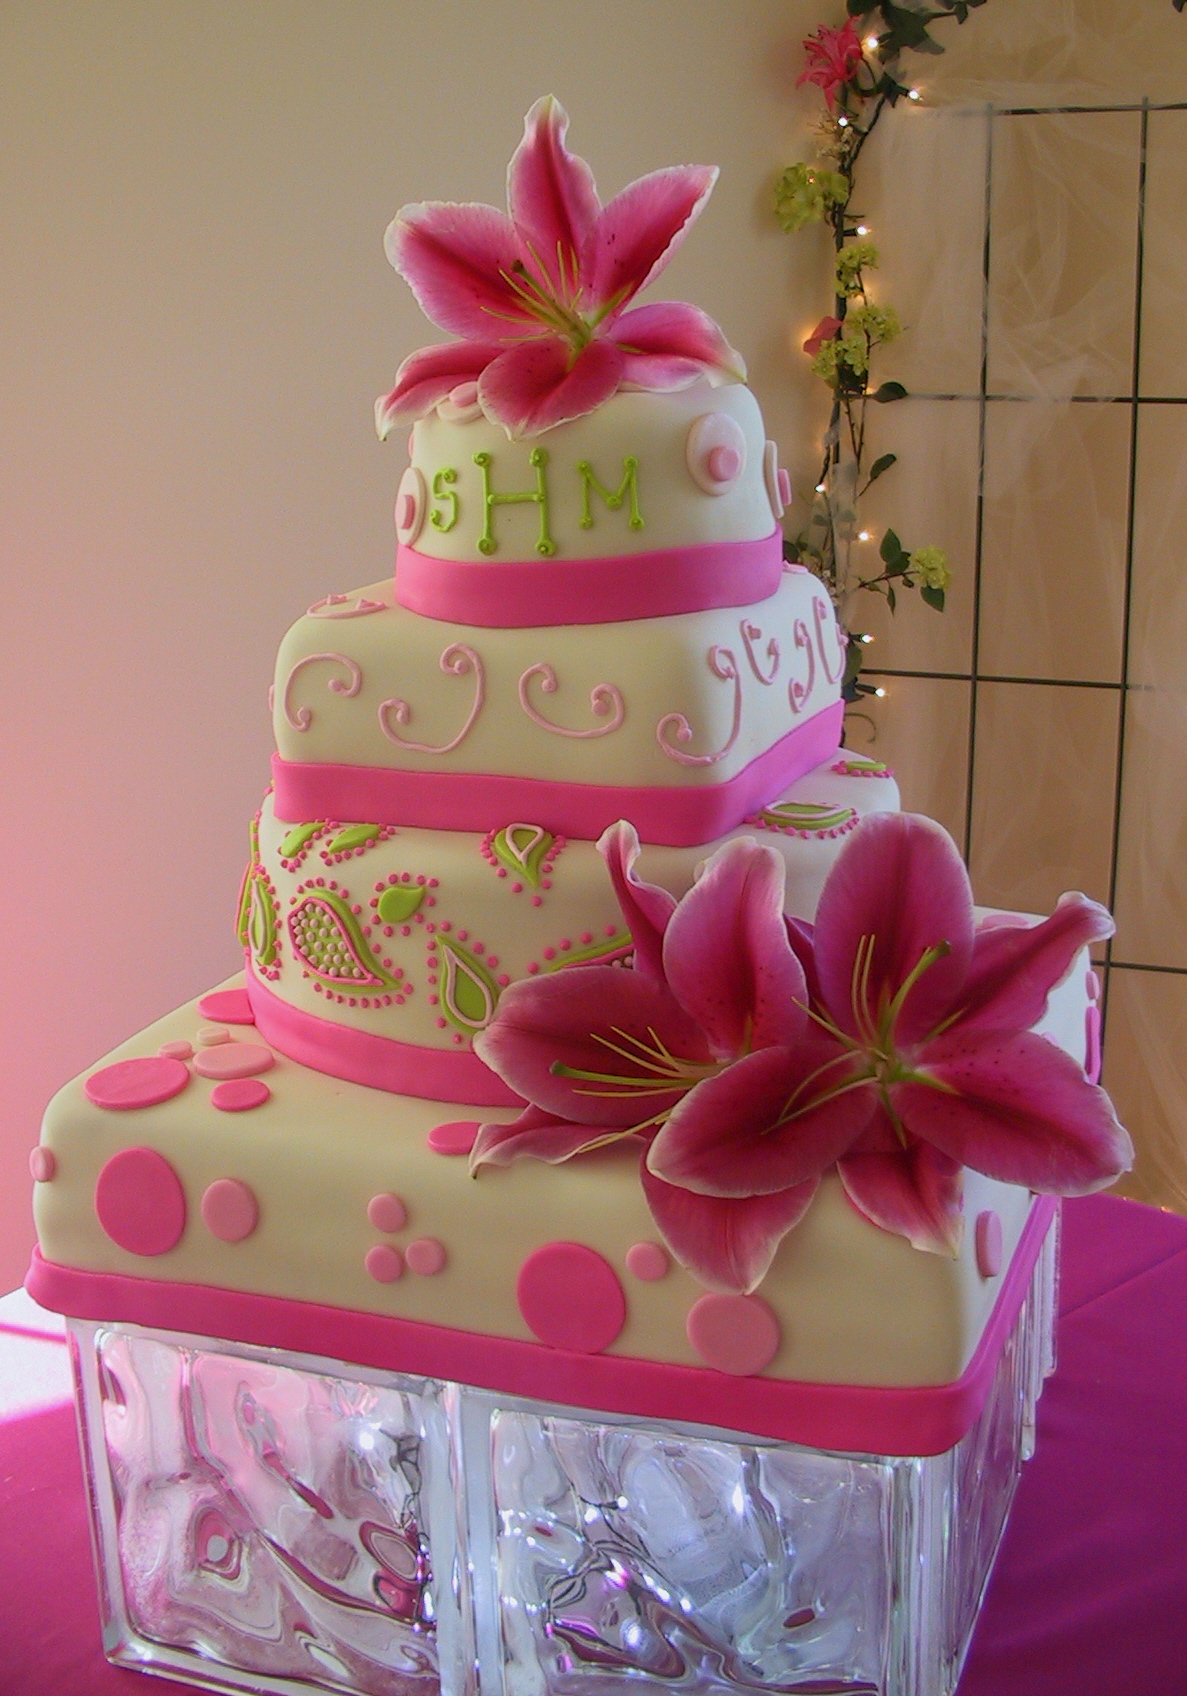 Pink and lime green wedding cakes